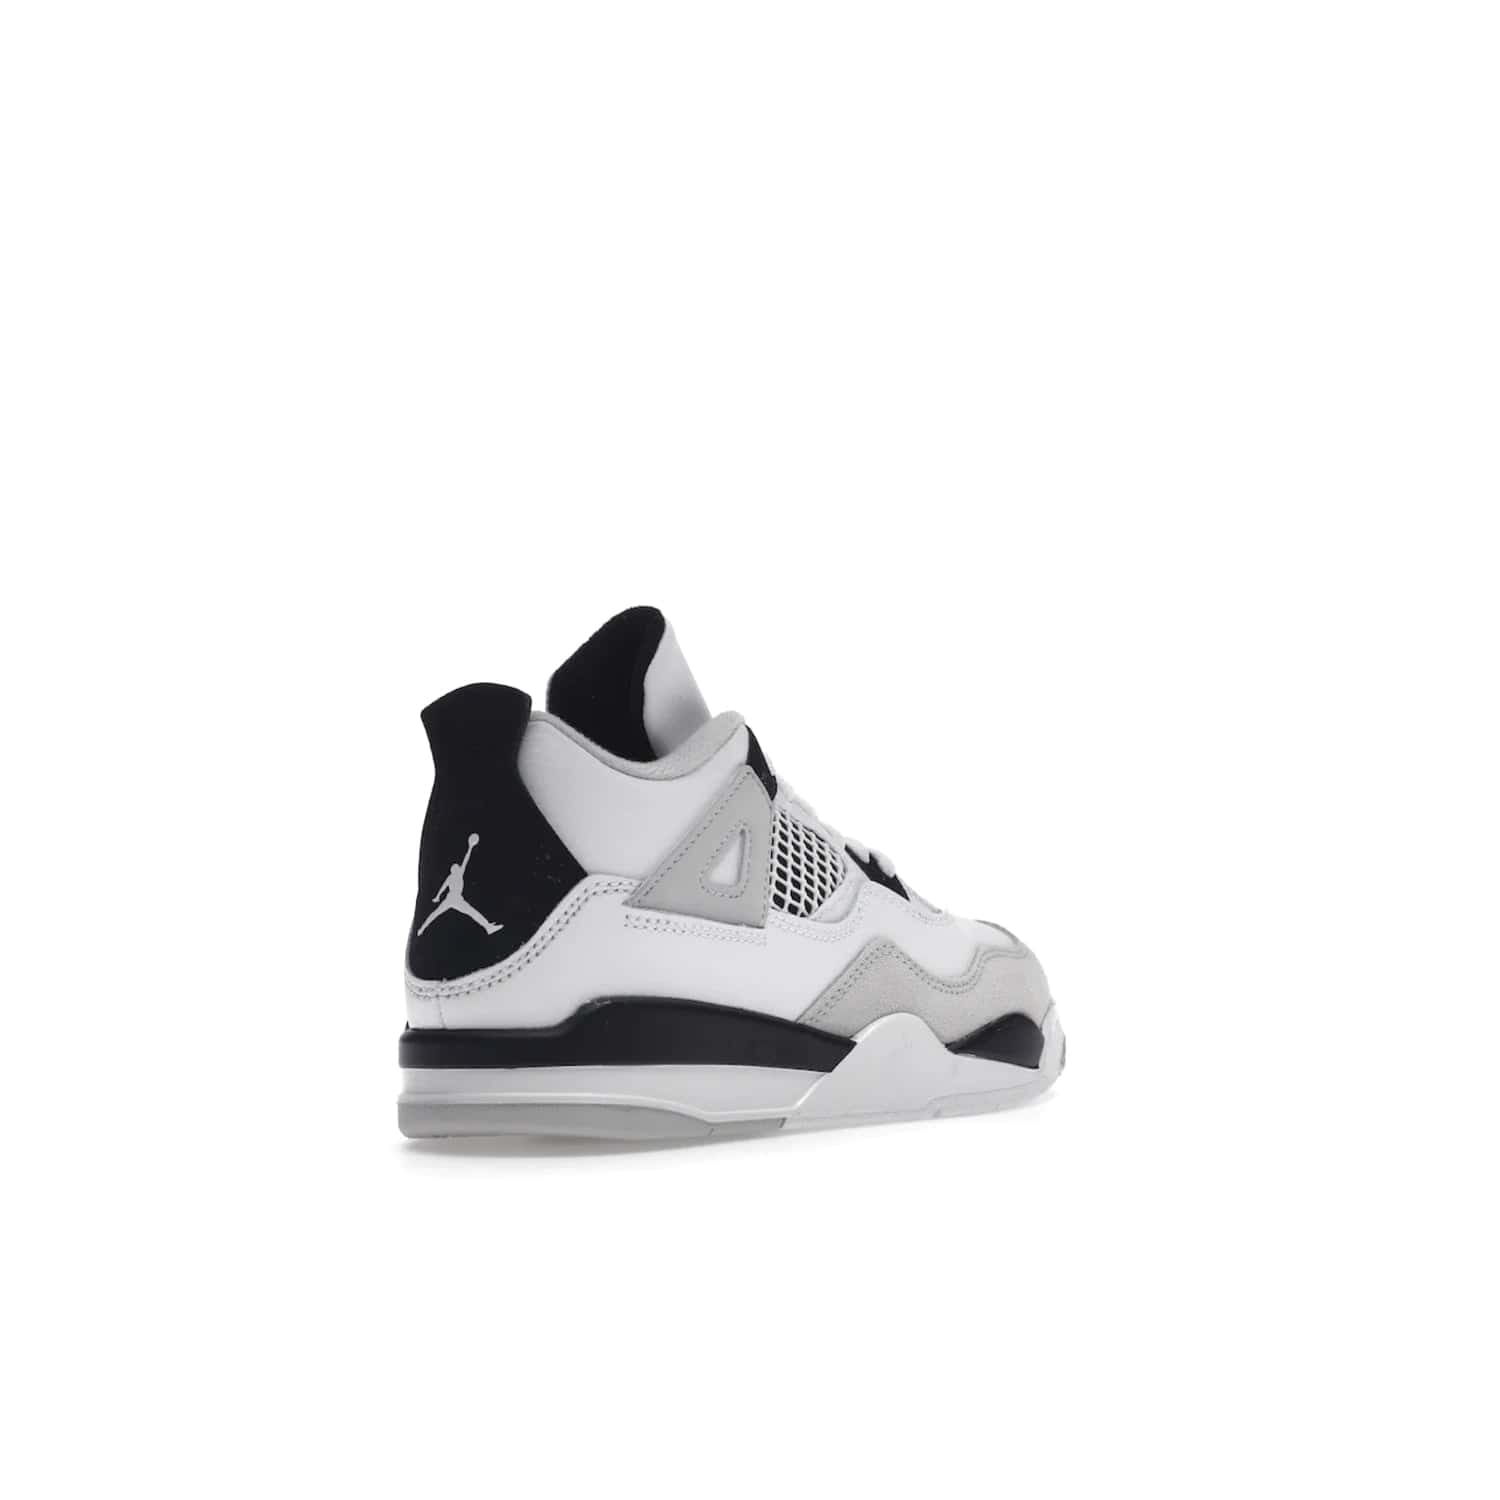 Jordan 4 Retro Military Black (PS) - Image 32 - Only at www.BallersClubKickz.com - Iconic Air Jordan 4 Retro Military Black PS with classic White, Black and Neutral Grey color palette. Mesh panels, adjustable lacing and rubber outsole. Releasing on 21st May 2022 - must-have for any sneaker collection.